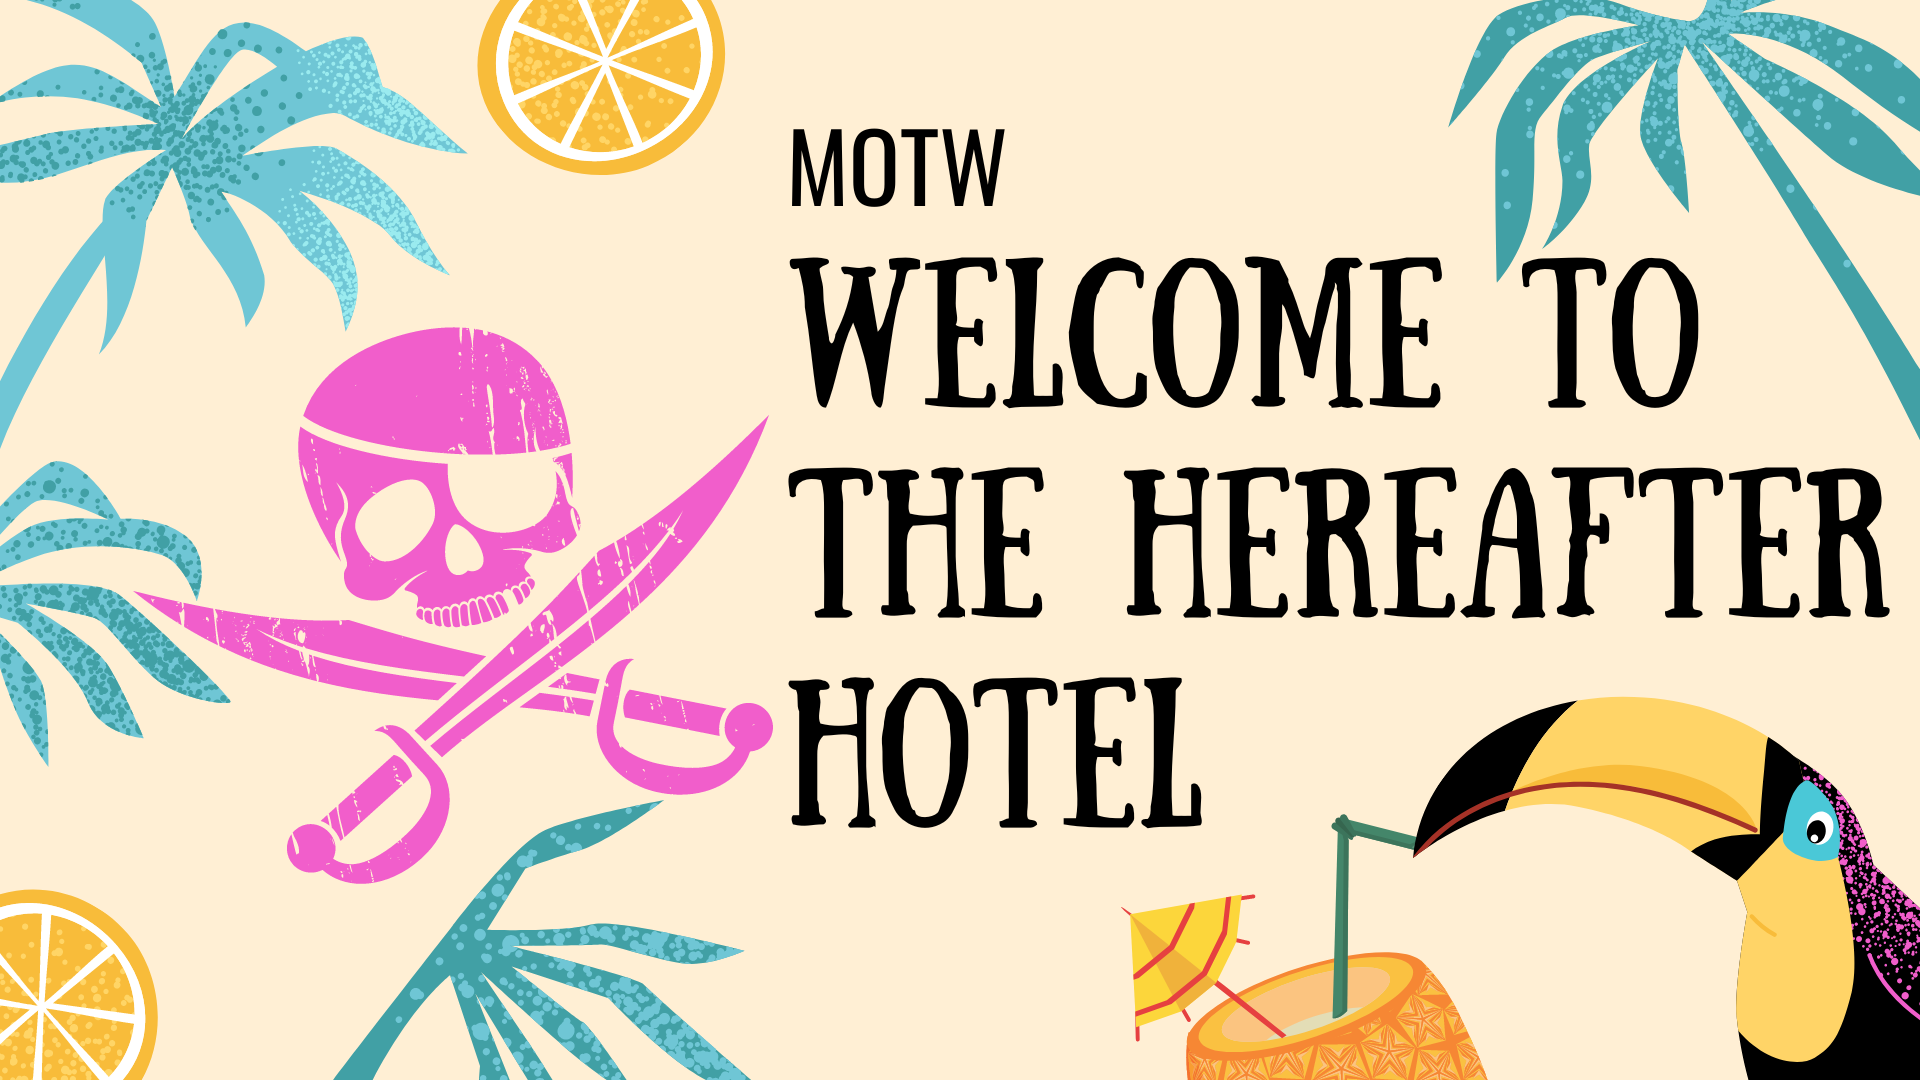 Welcome to The Hereafter Hotel - MOTW Oneshot